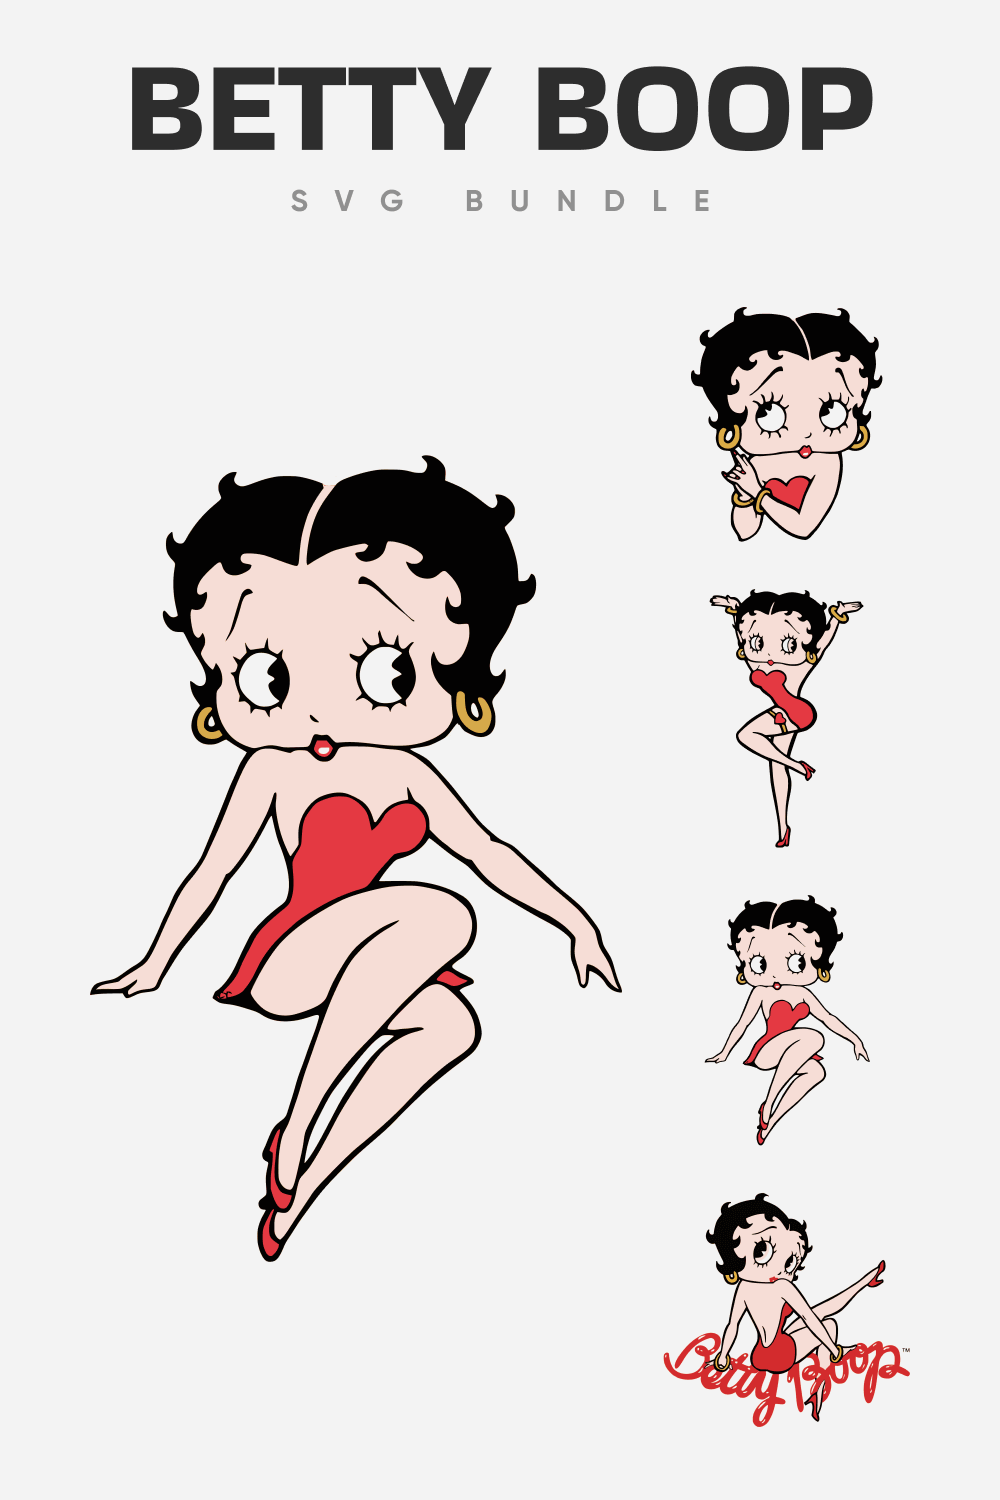 Brunette Betty Boop with big eyes, thin eyebrows and red lips.